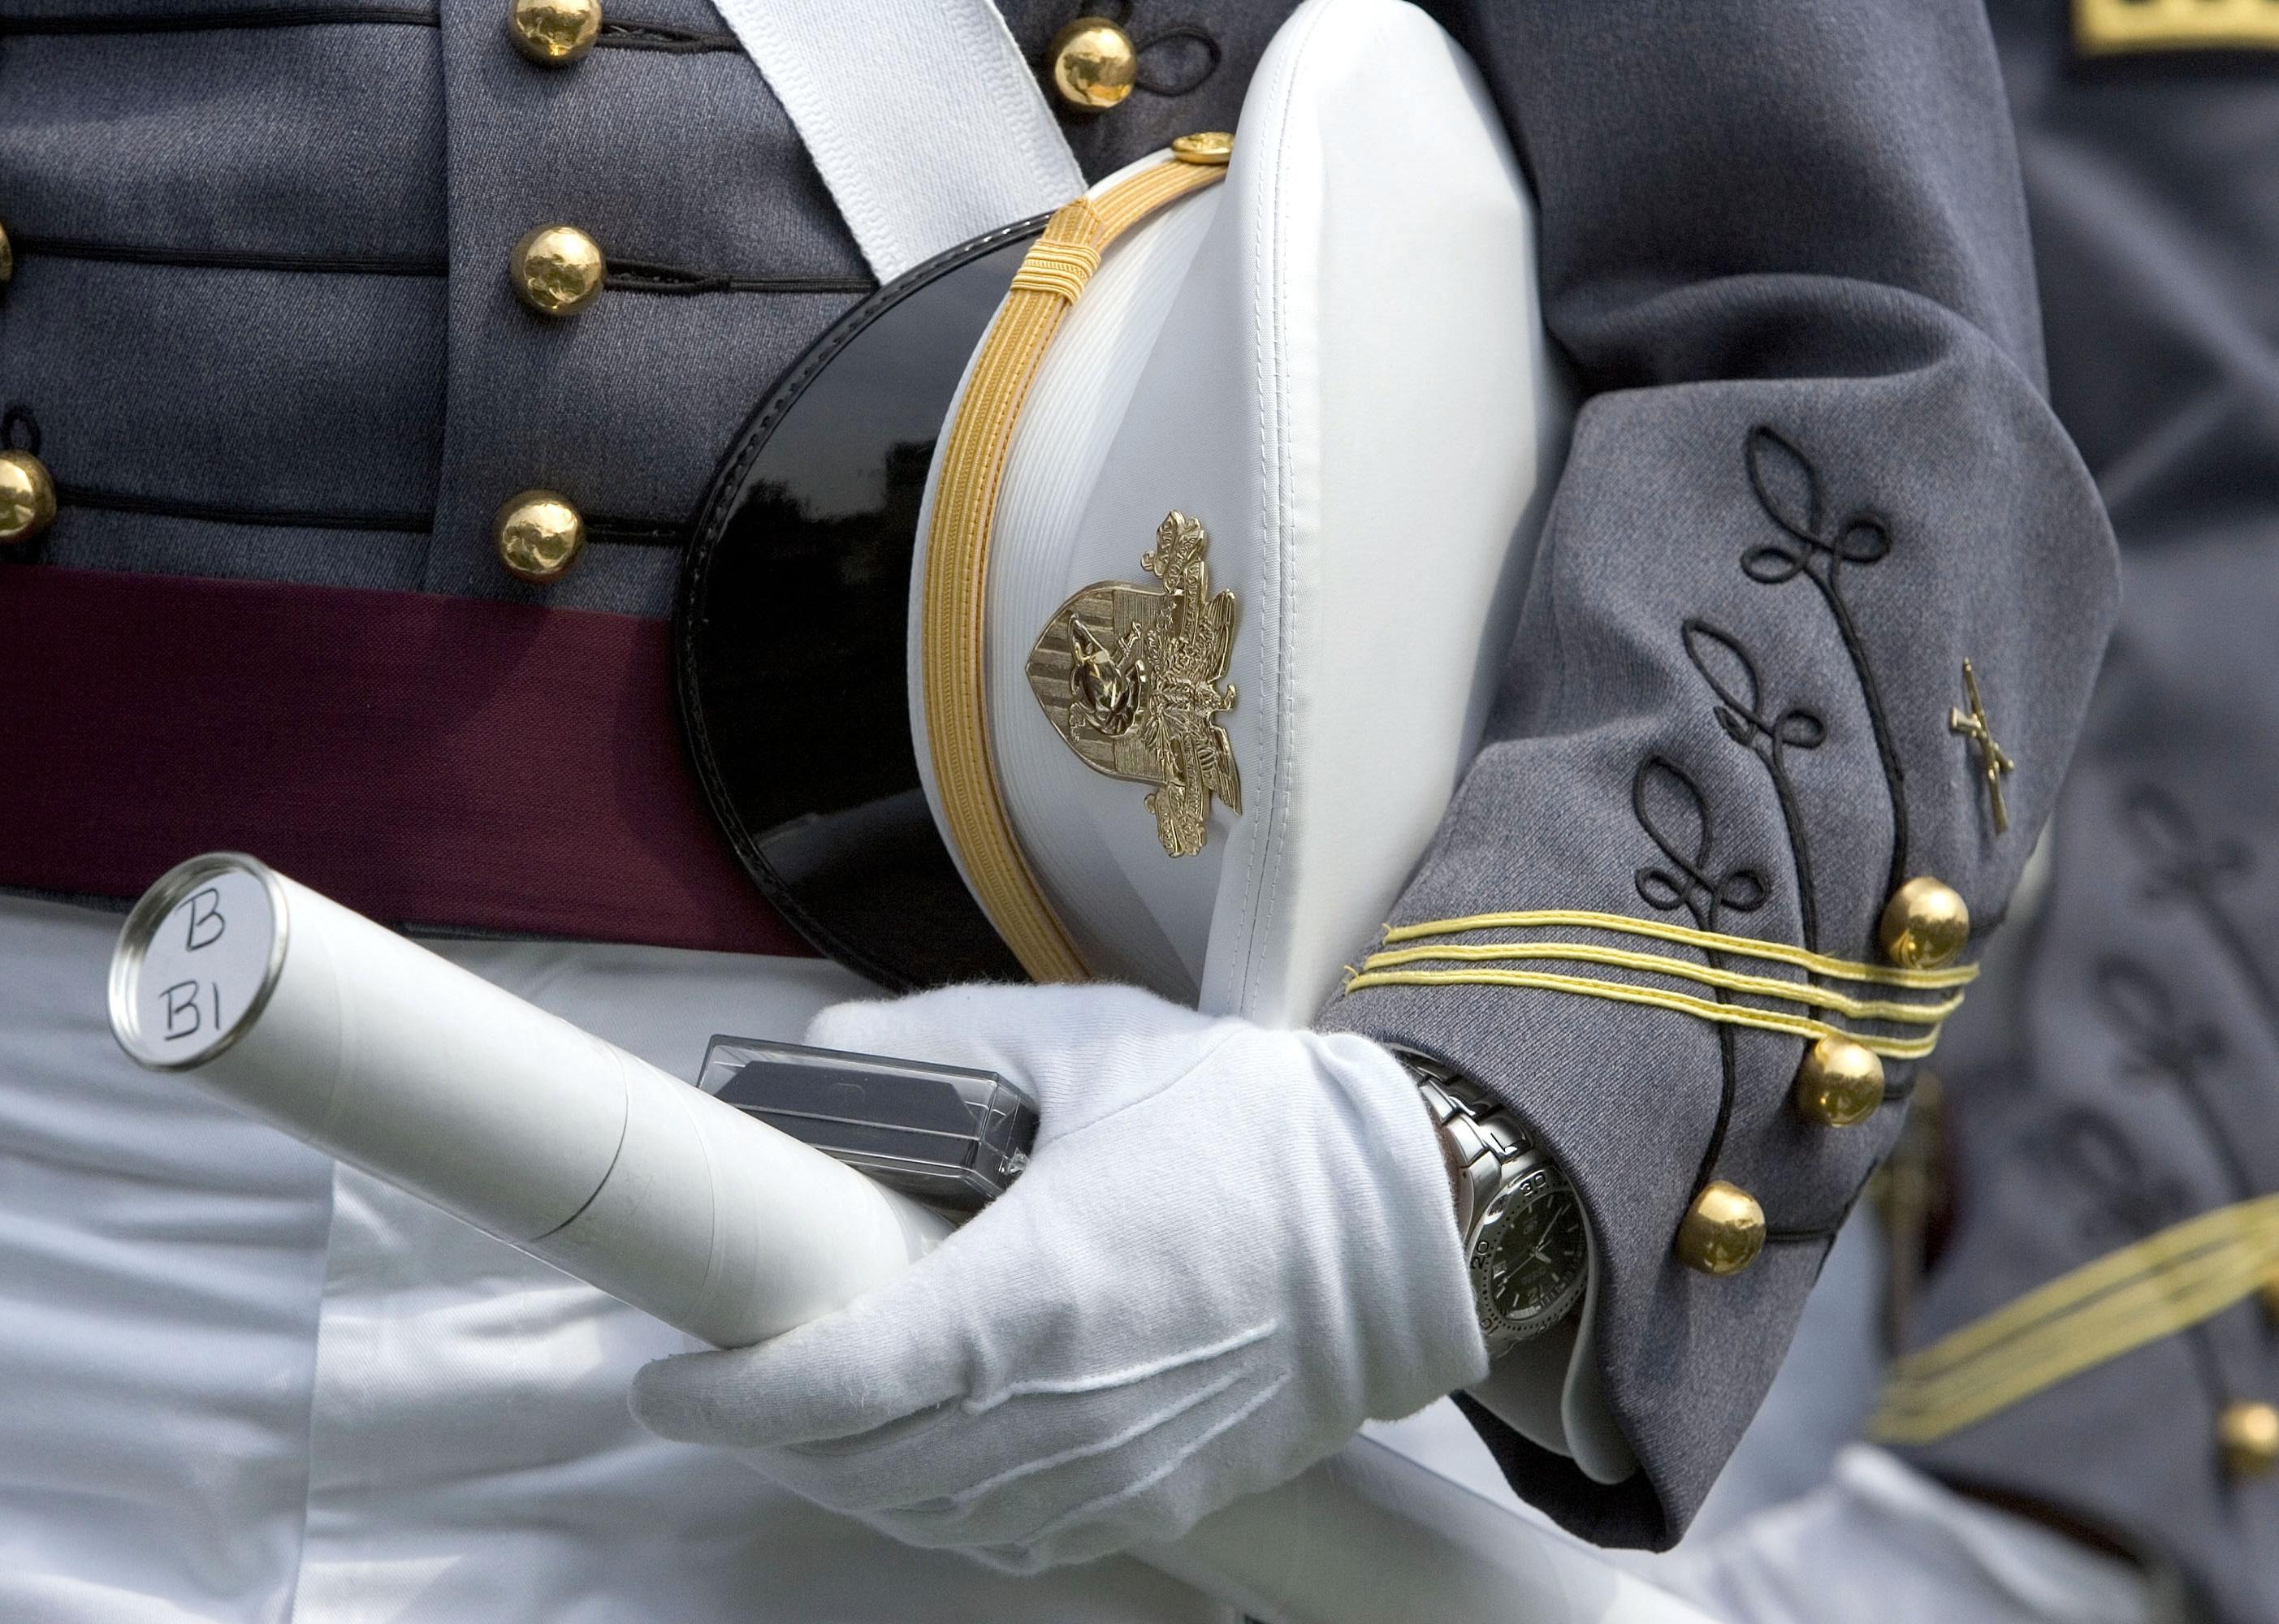 A cadet holds his diploma and cap during the graduation ceremony at the U.S. Military Academy.